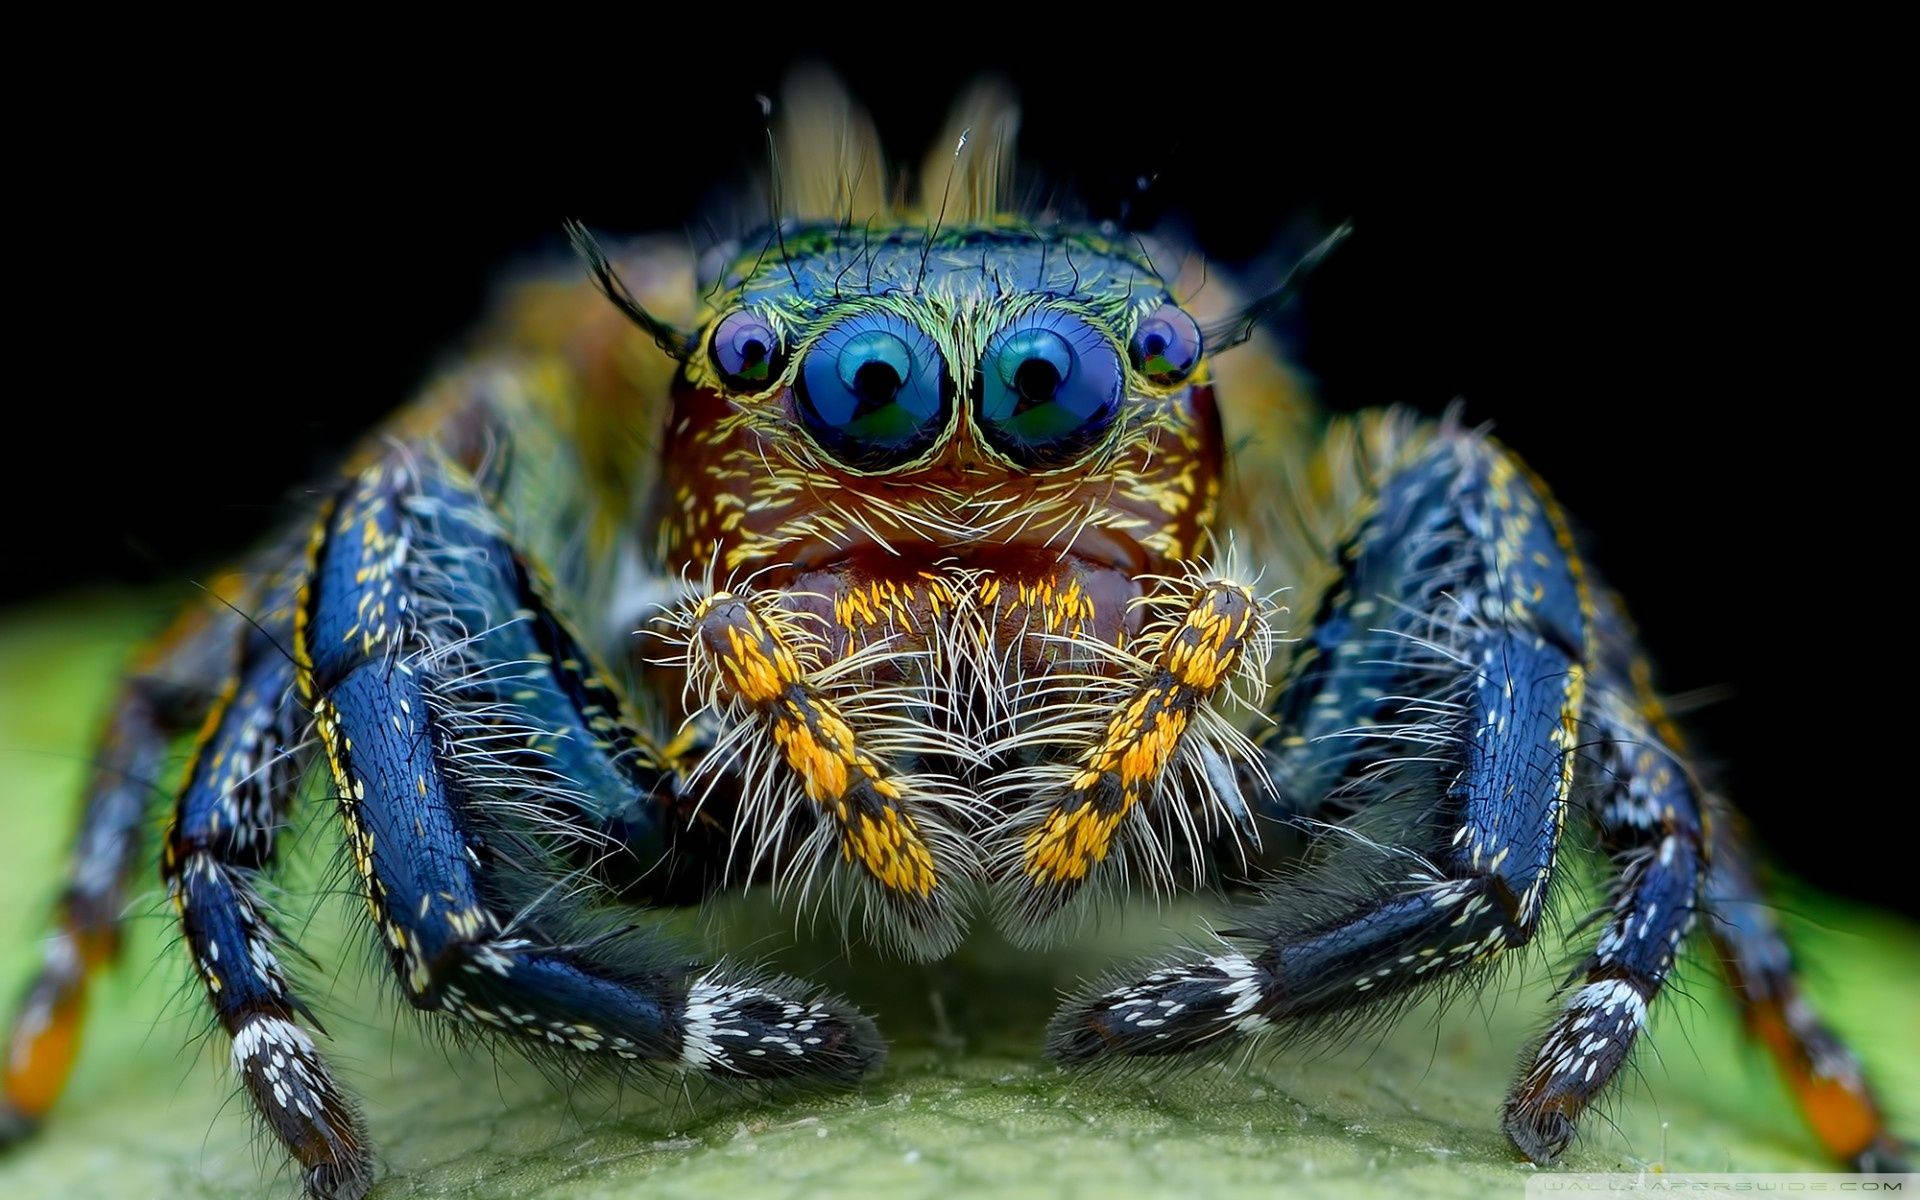 Insect Spider With Eyelashes Background